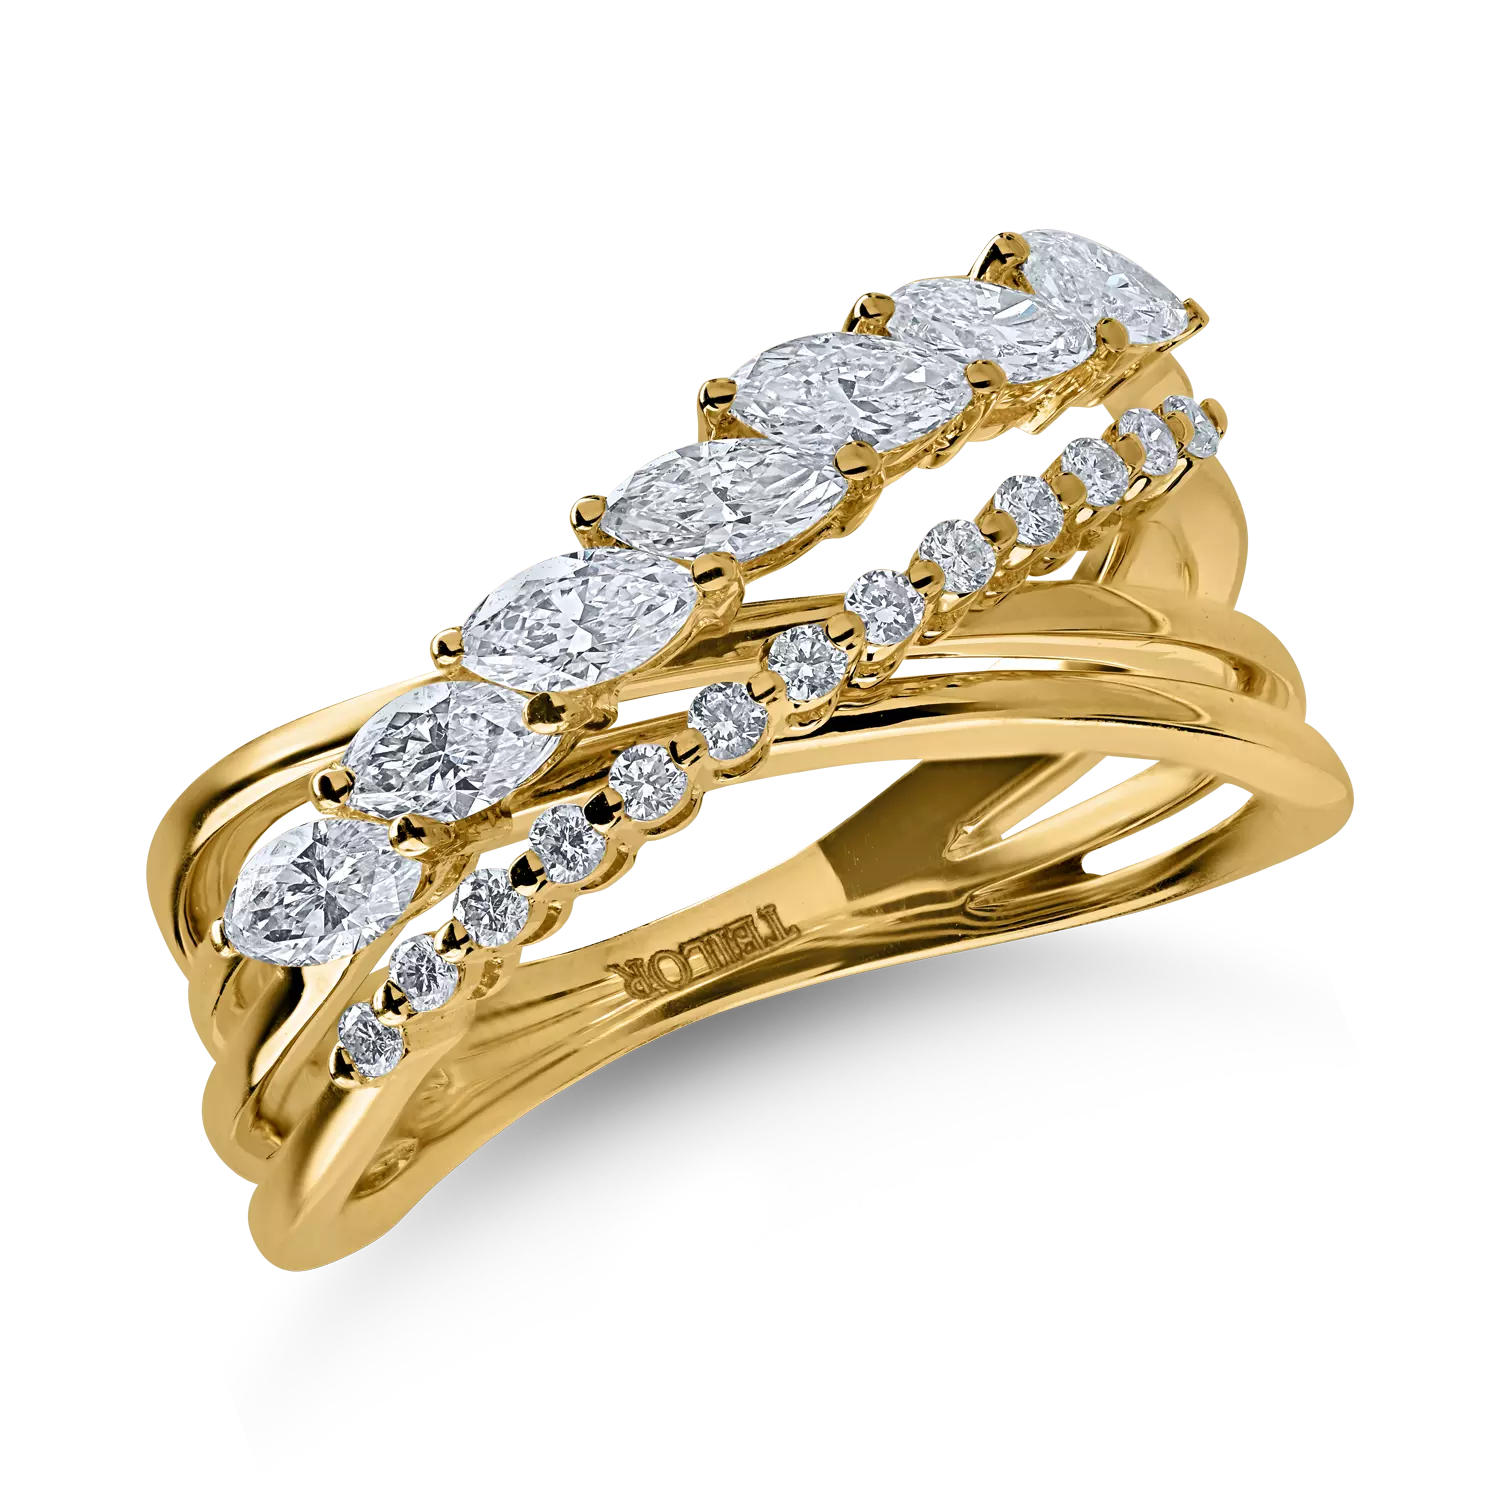 Yellow gold ring with 0.75ct diamonds